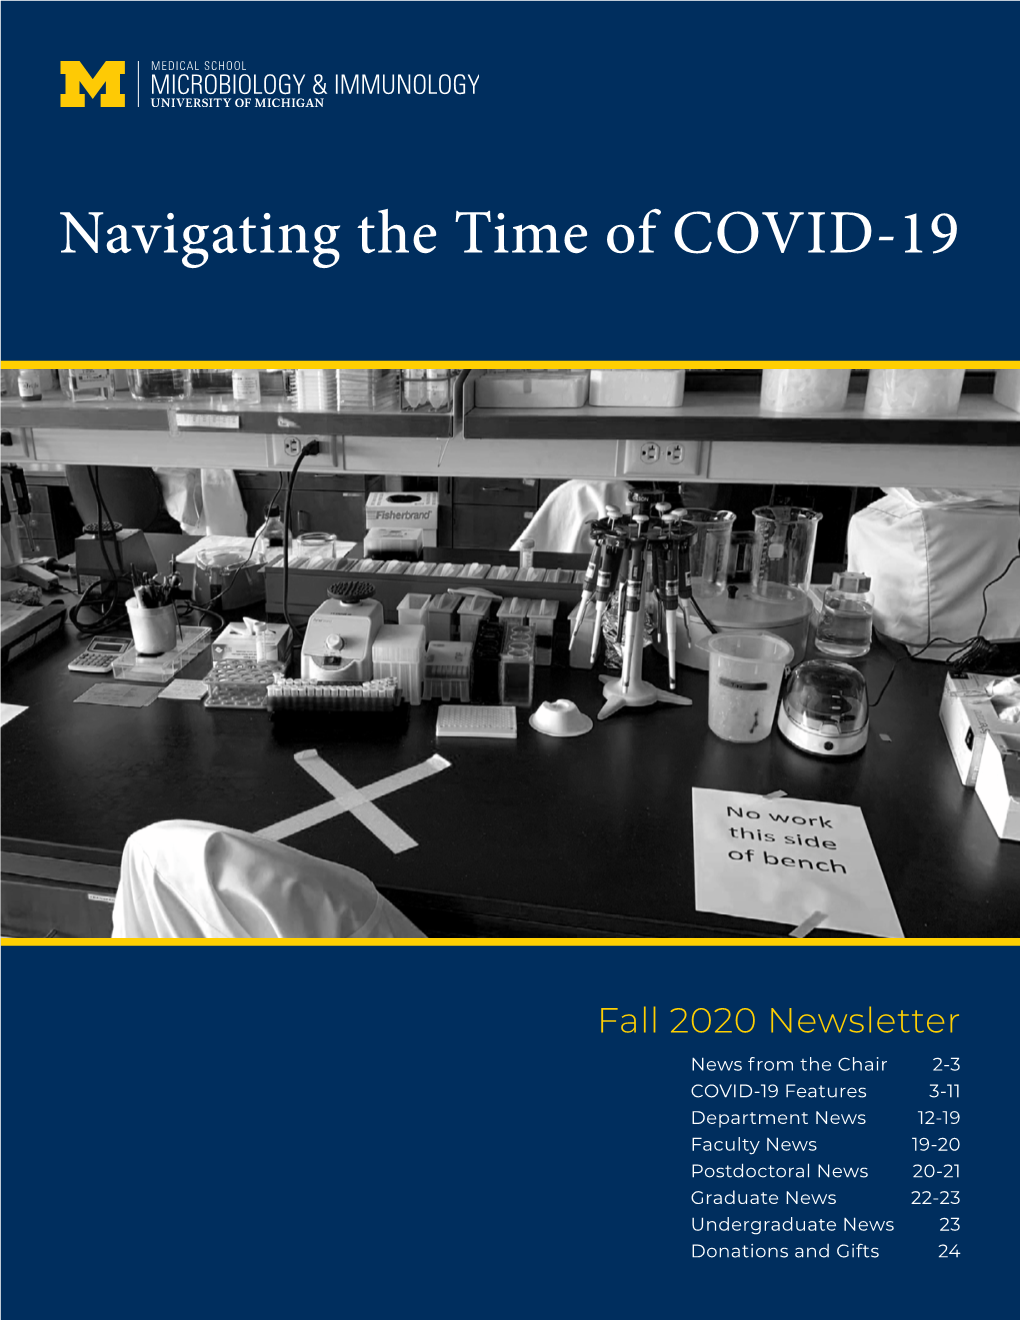 Navigating the Time of COVID-19